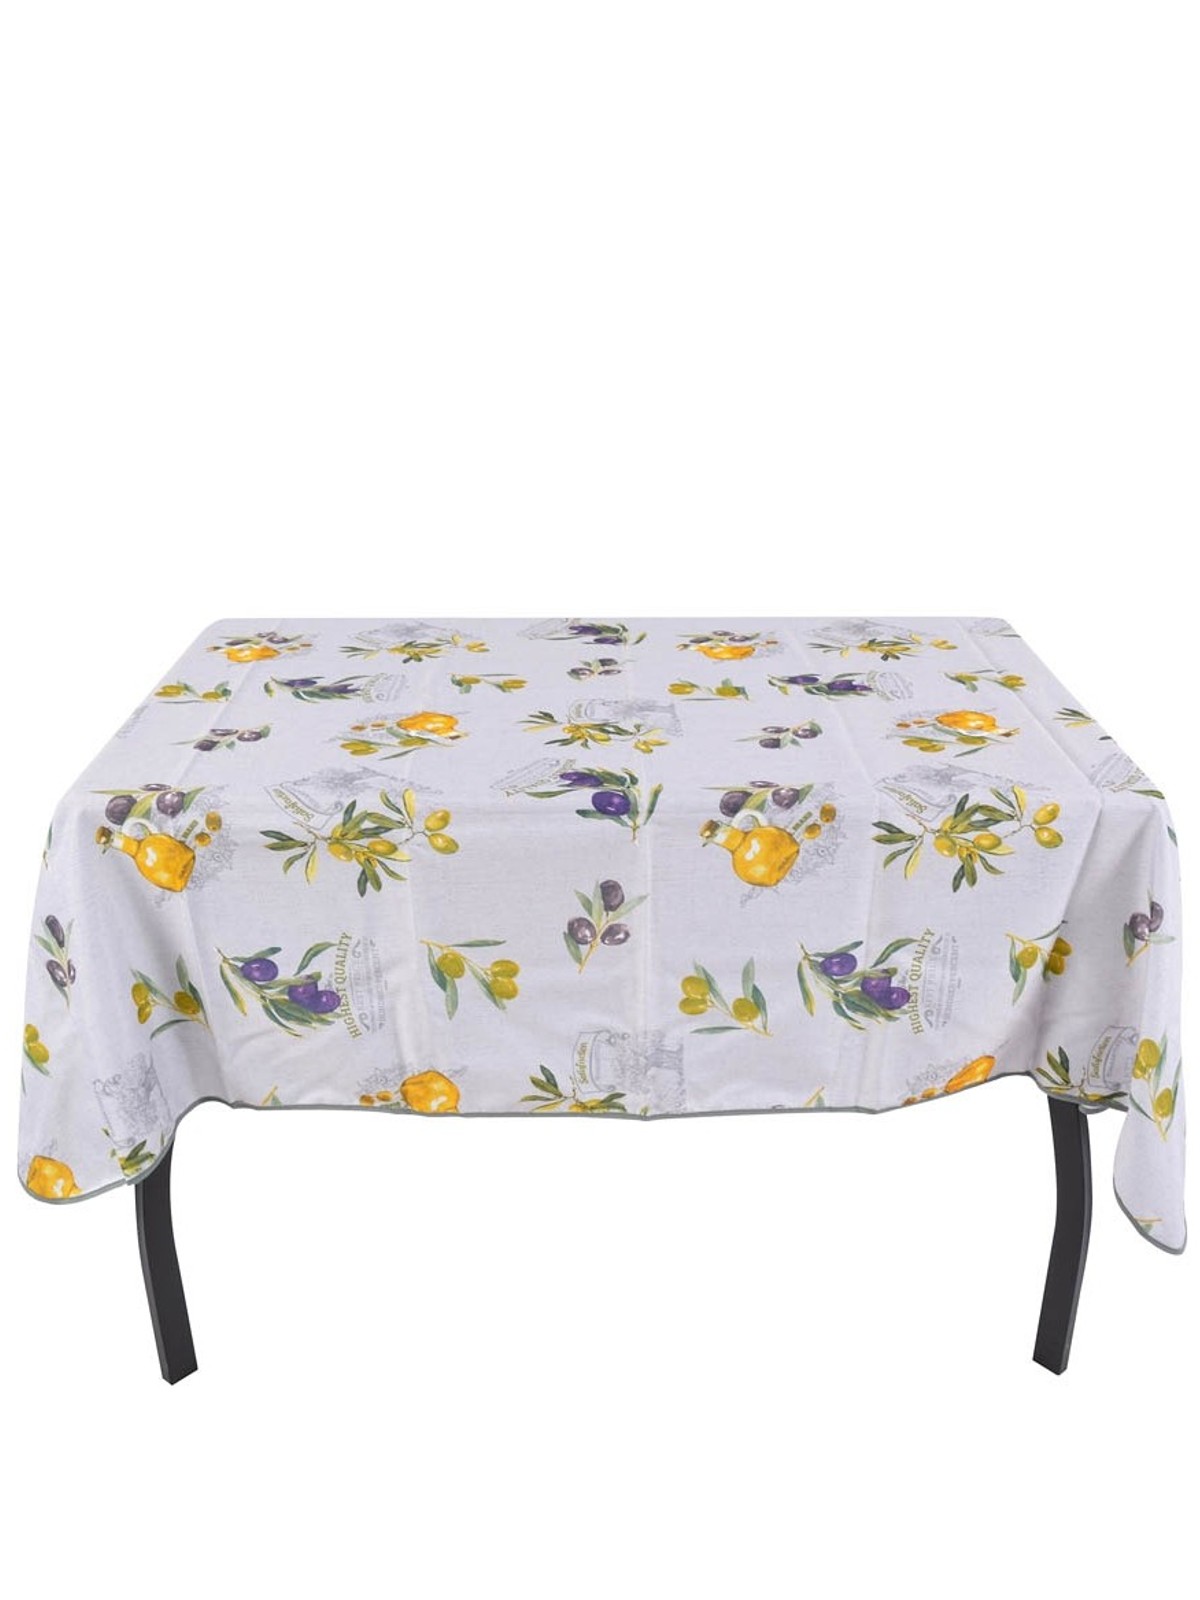 Non stained tablecloth